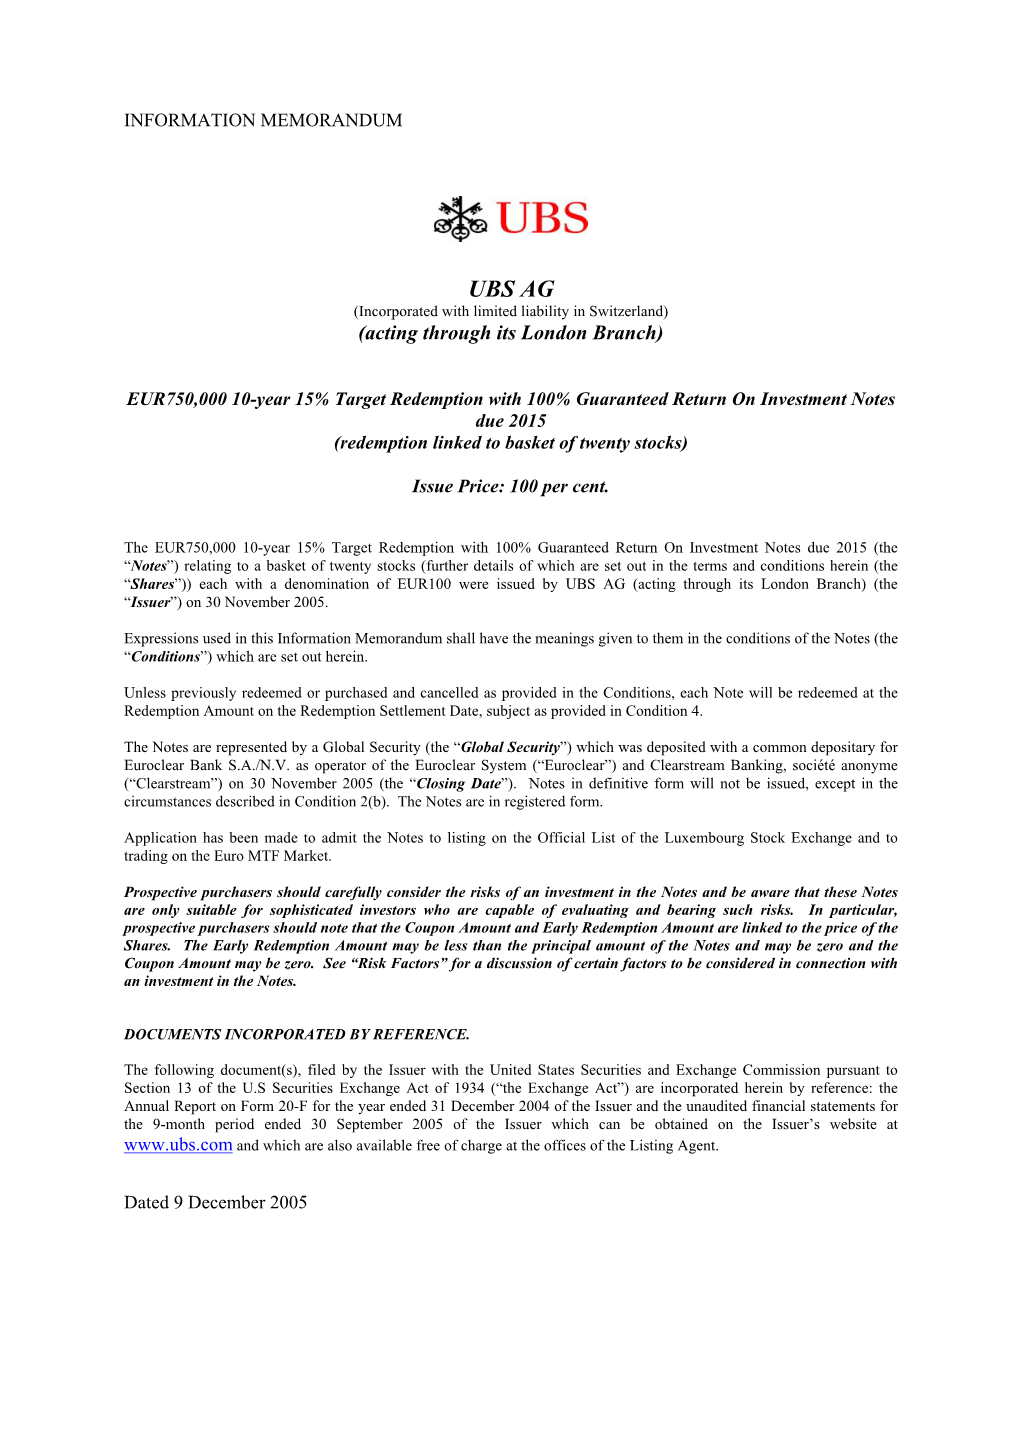 UBS AG (Incorporated with Limited Liability in Switzerland) (Acting Through Its London Branch)